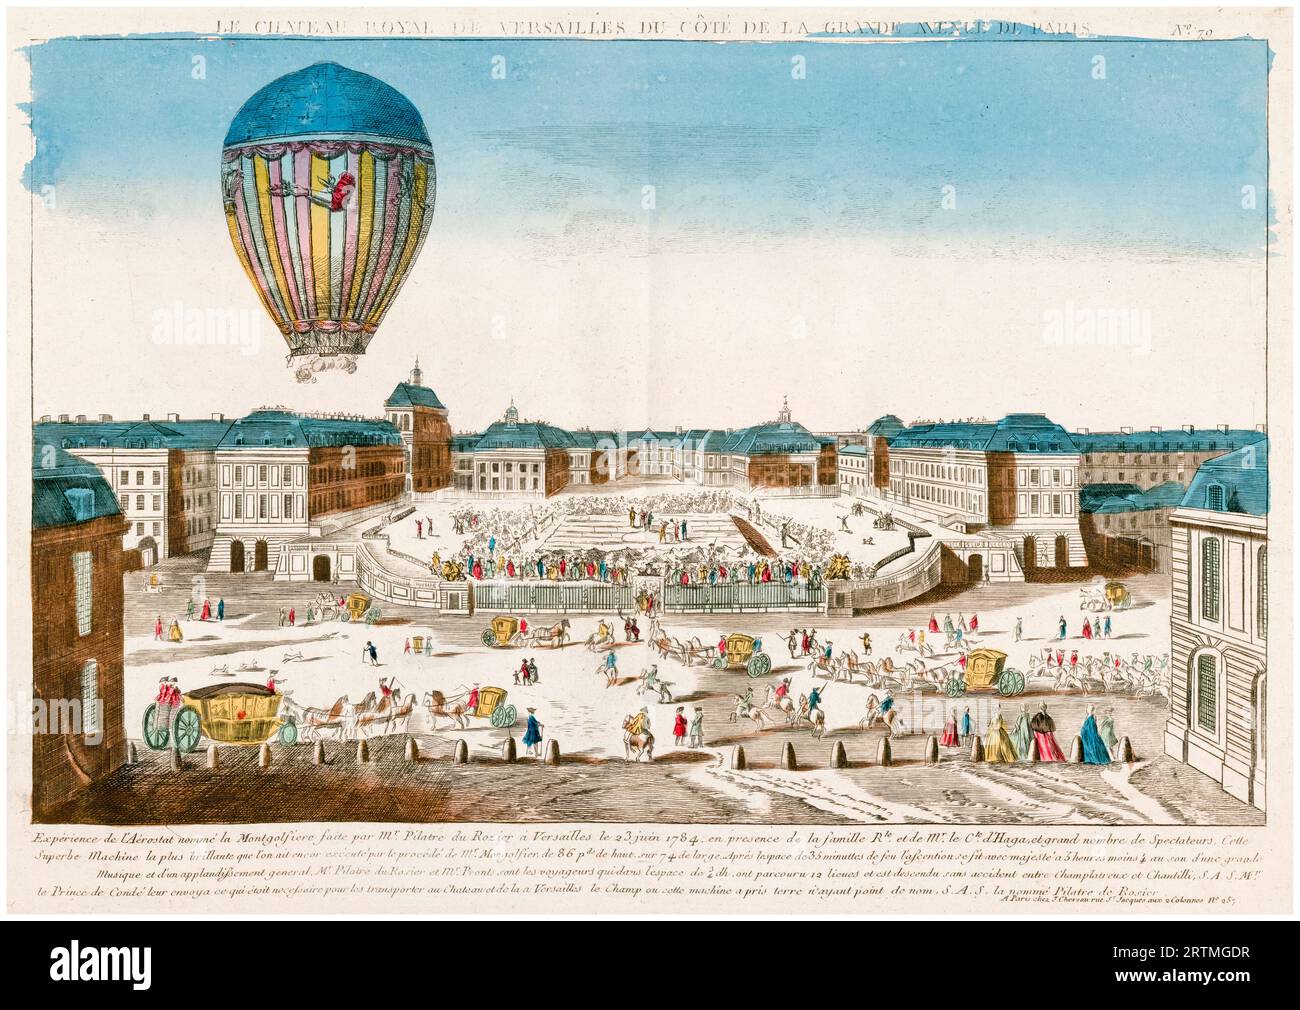 The hot air balloon 'Marie Antoinette' was flown by Jean-François Pilâtre de Rozier and French chemist Joseph Louis Proust on June 23rd 1784 at Versailles in front of King Louis XVI and King Gustav III of Sweden, hand coloured engraving, 1784 Stock Photo